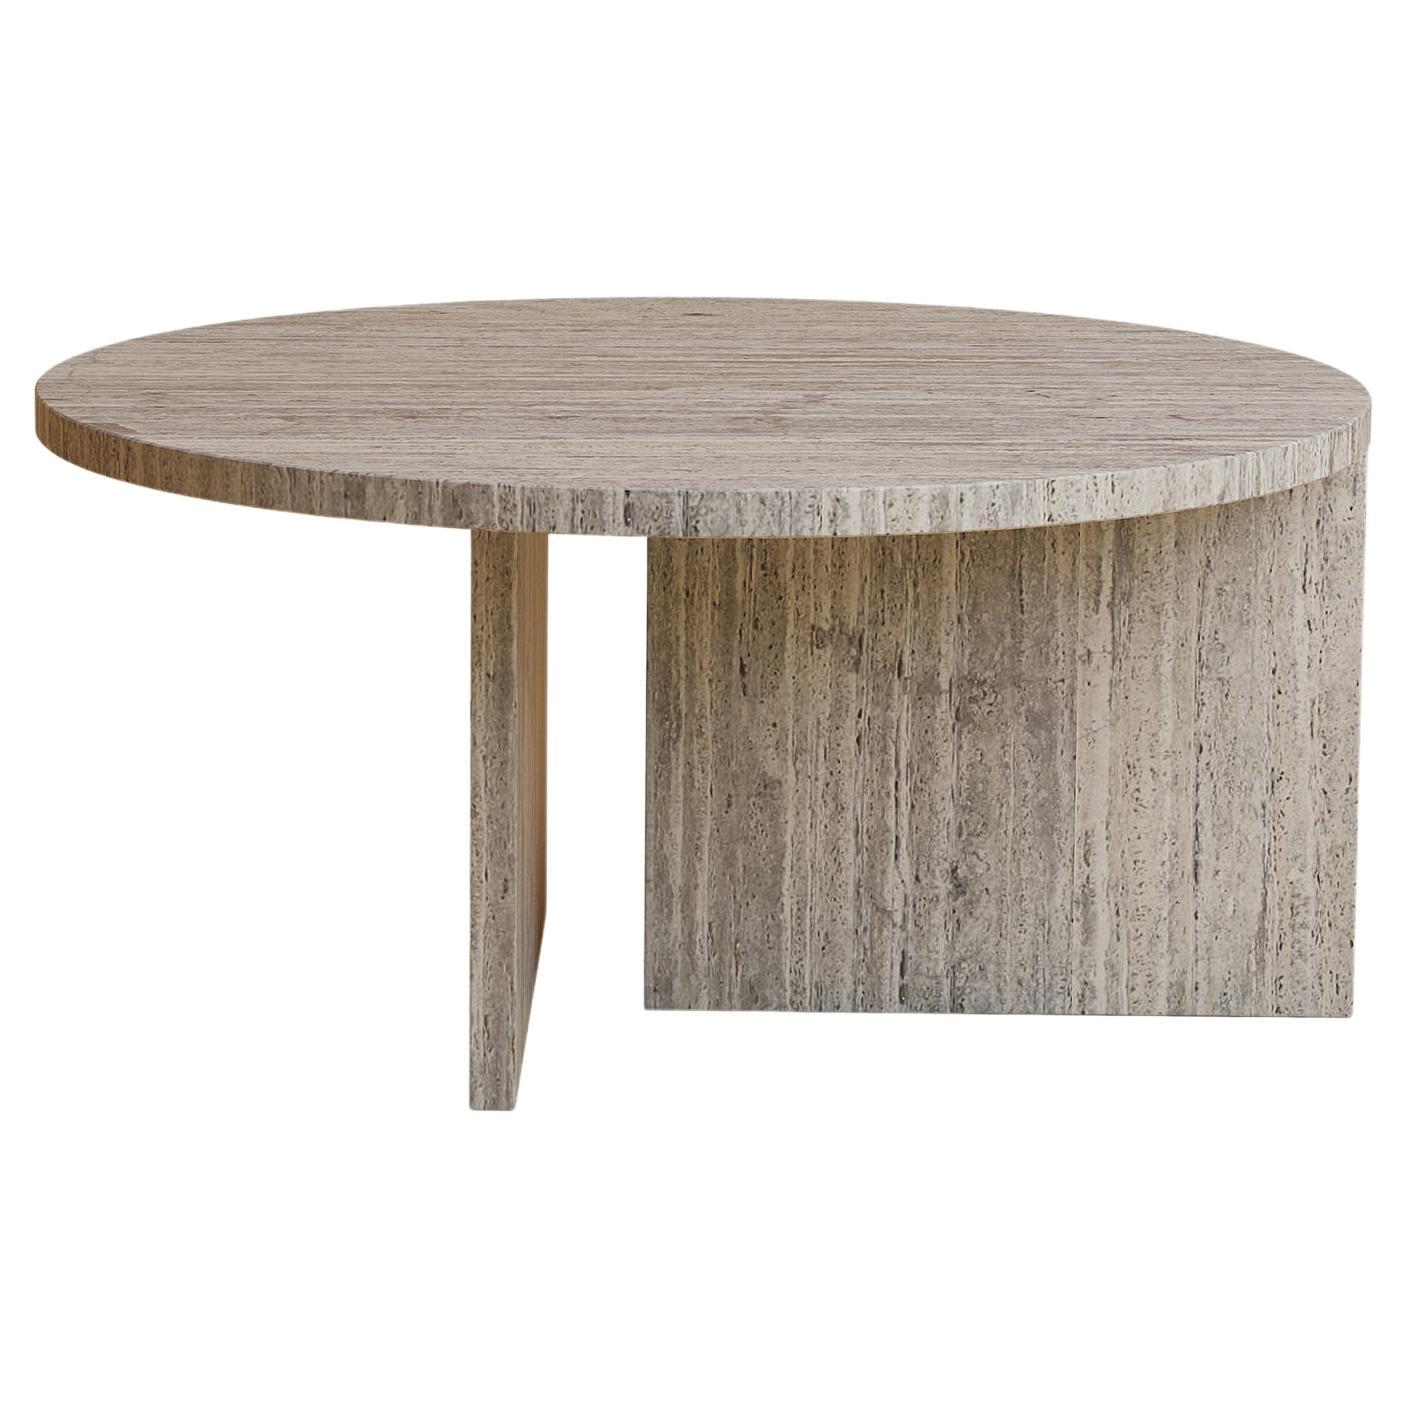 Travertine Titanium Marble Round Coffee Table, Made in Italy For Sale